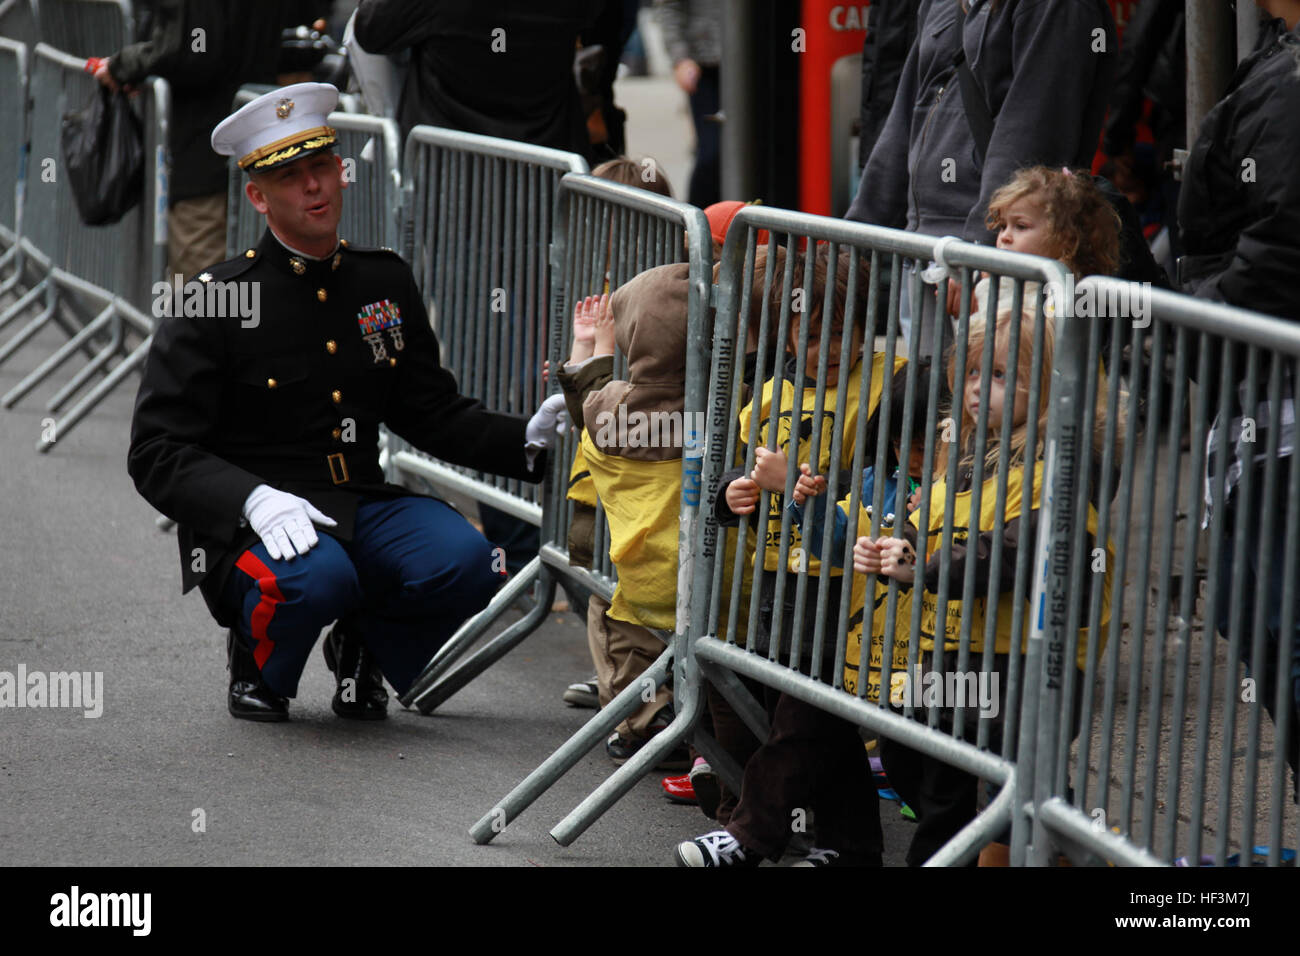 During the New York City Veterans Day parade, Lt. Col. Walter C. Sopp, speaks with 3 year old children from Preschool of America Nov. 11, 2009. Sopp is the executive officer of Special Purpose Marine Air Ground Task Force 26, a unit formed to showcase Marine Corps personnel, aircraft, vehicles and equipment while docked at Pier 88 for the USS New York commissioning. Veterans Day DVIDS223307 Stock Photo